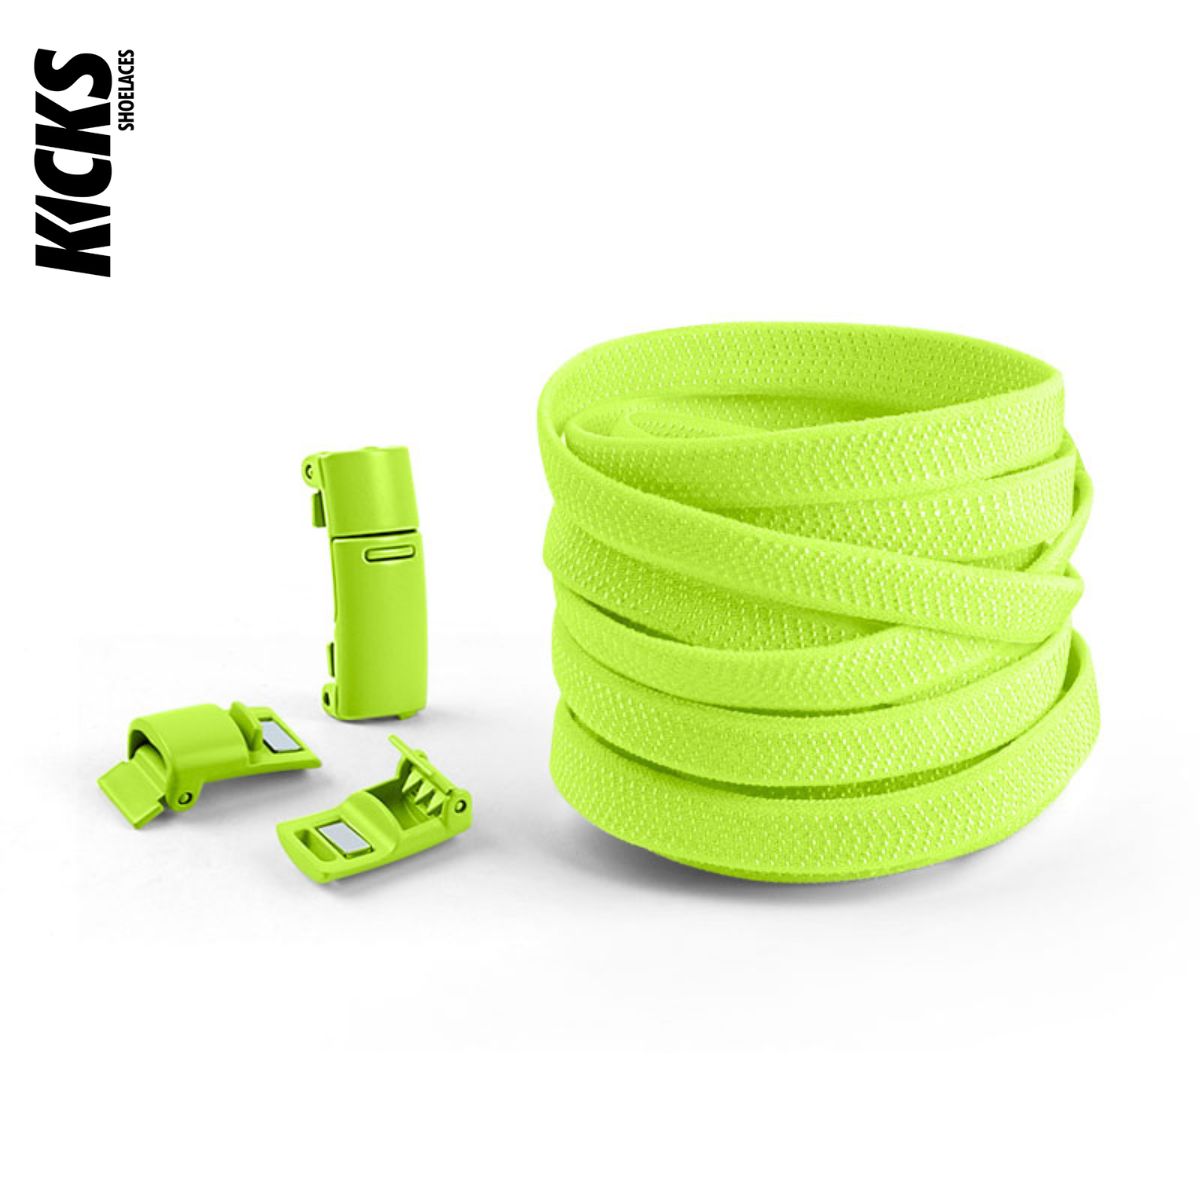 Fluorescent Green No-Tie Shoelaces with Magnetic Locks - Kicks Shoelaces